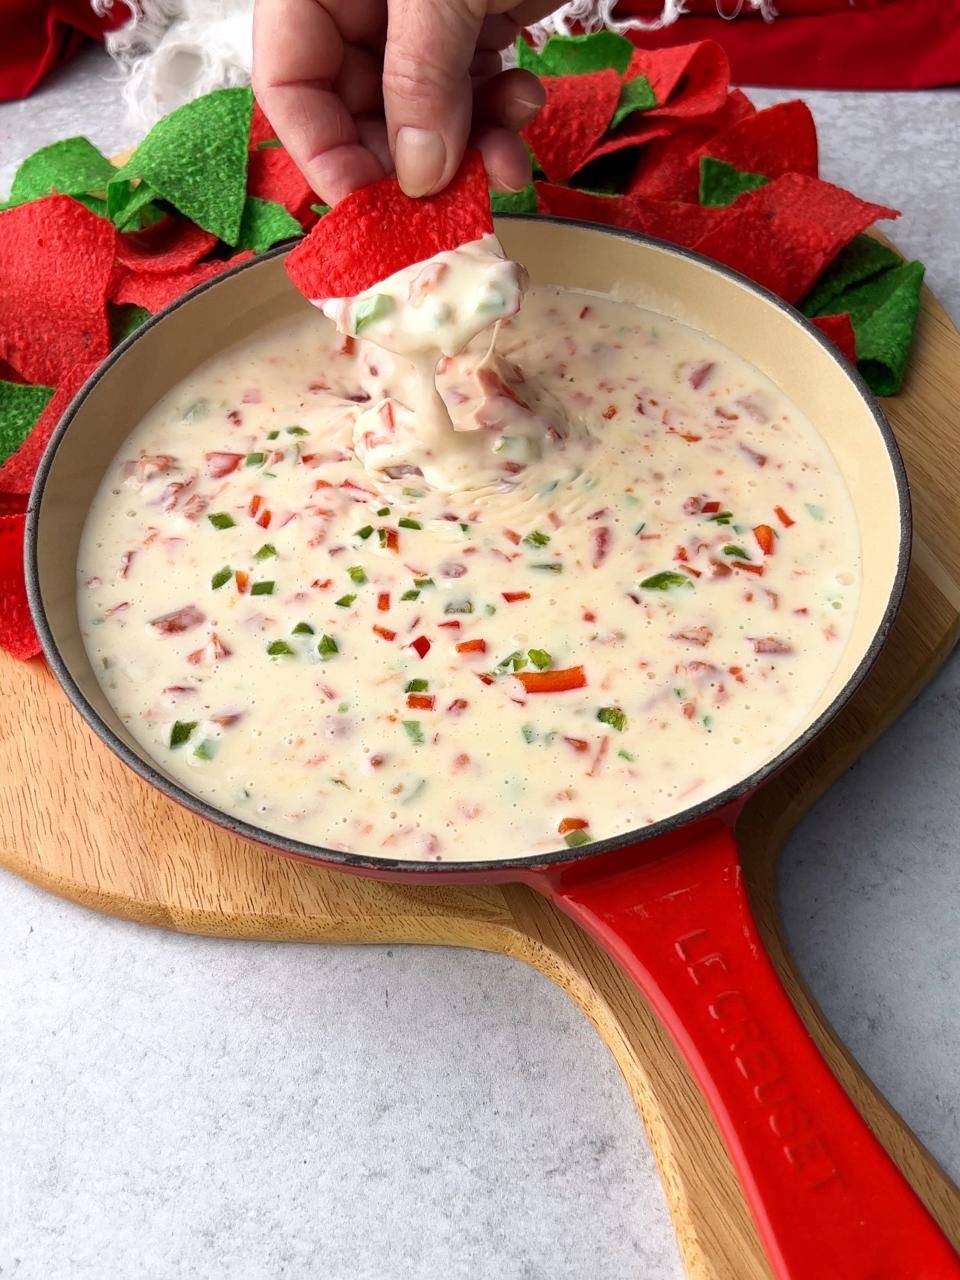 For the added holiday color in Queso Blanco, use finely diced red bell peppers and finely diced jalapeño peppers